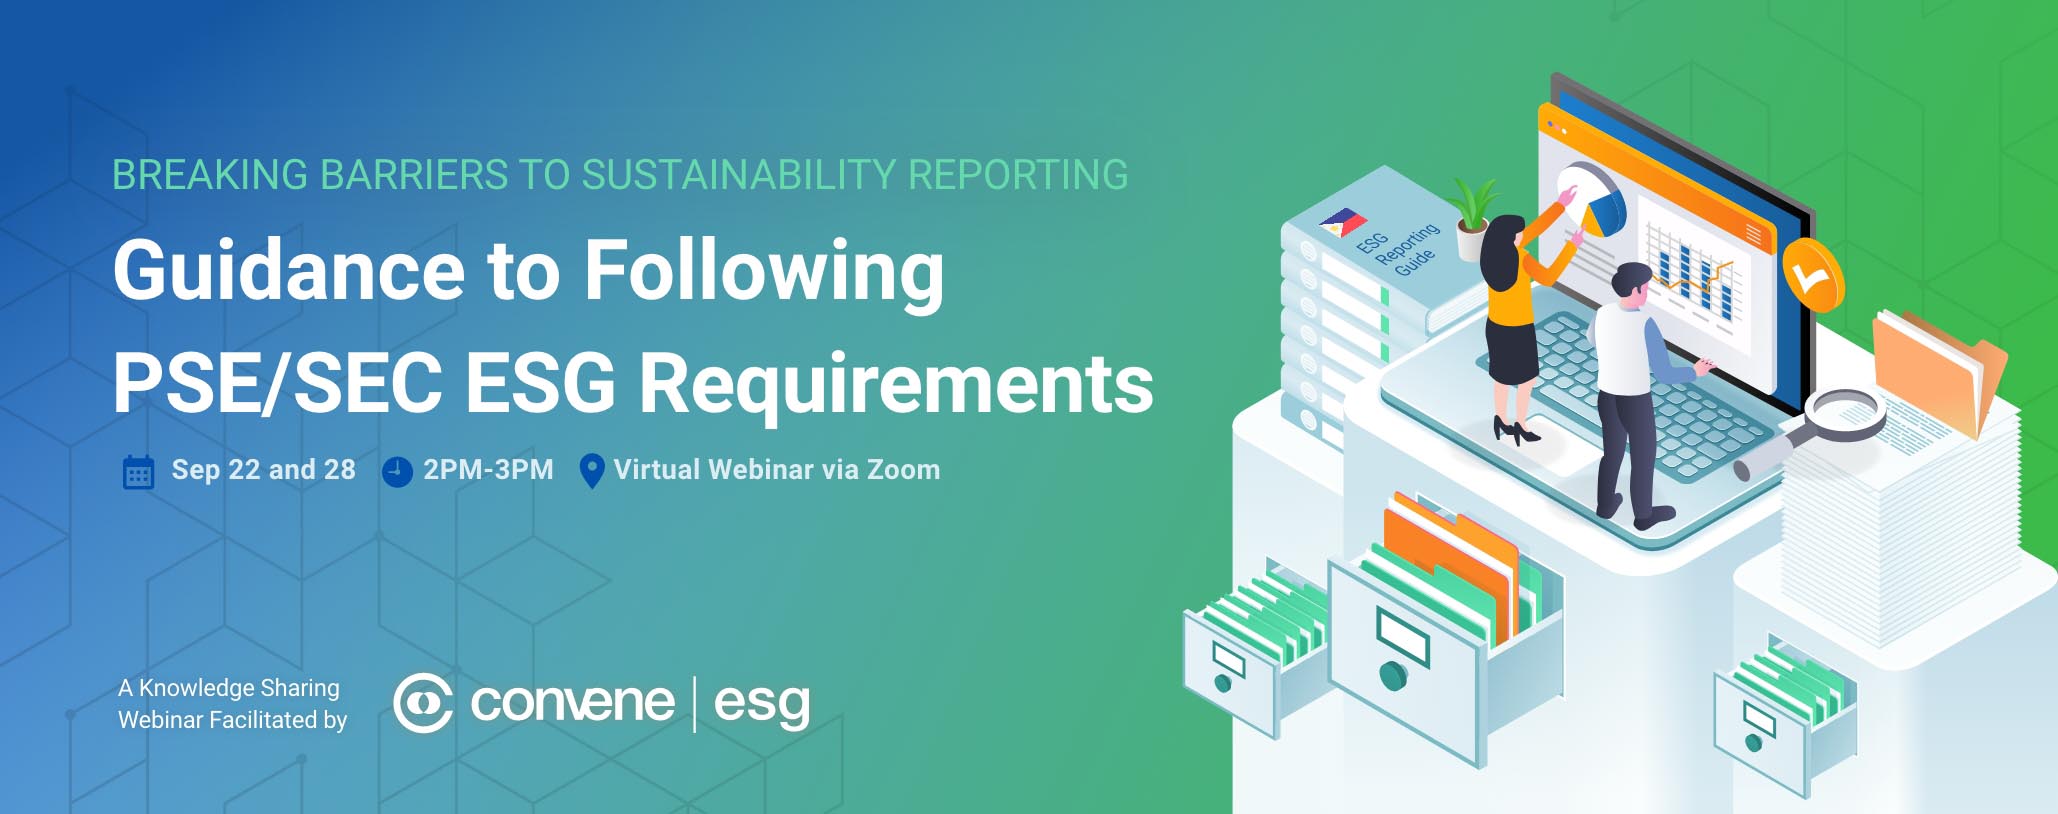 Breaking Barriers to Sustainability Reporting Guidance to Following PSE-SEC ESG Requirements